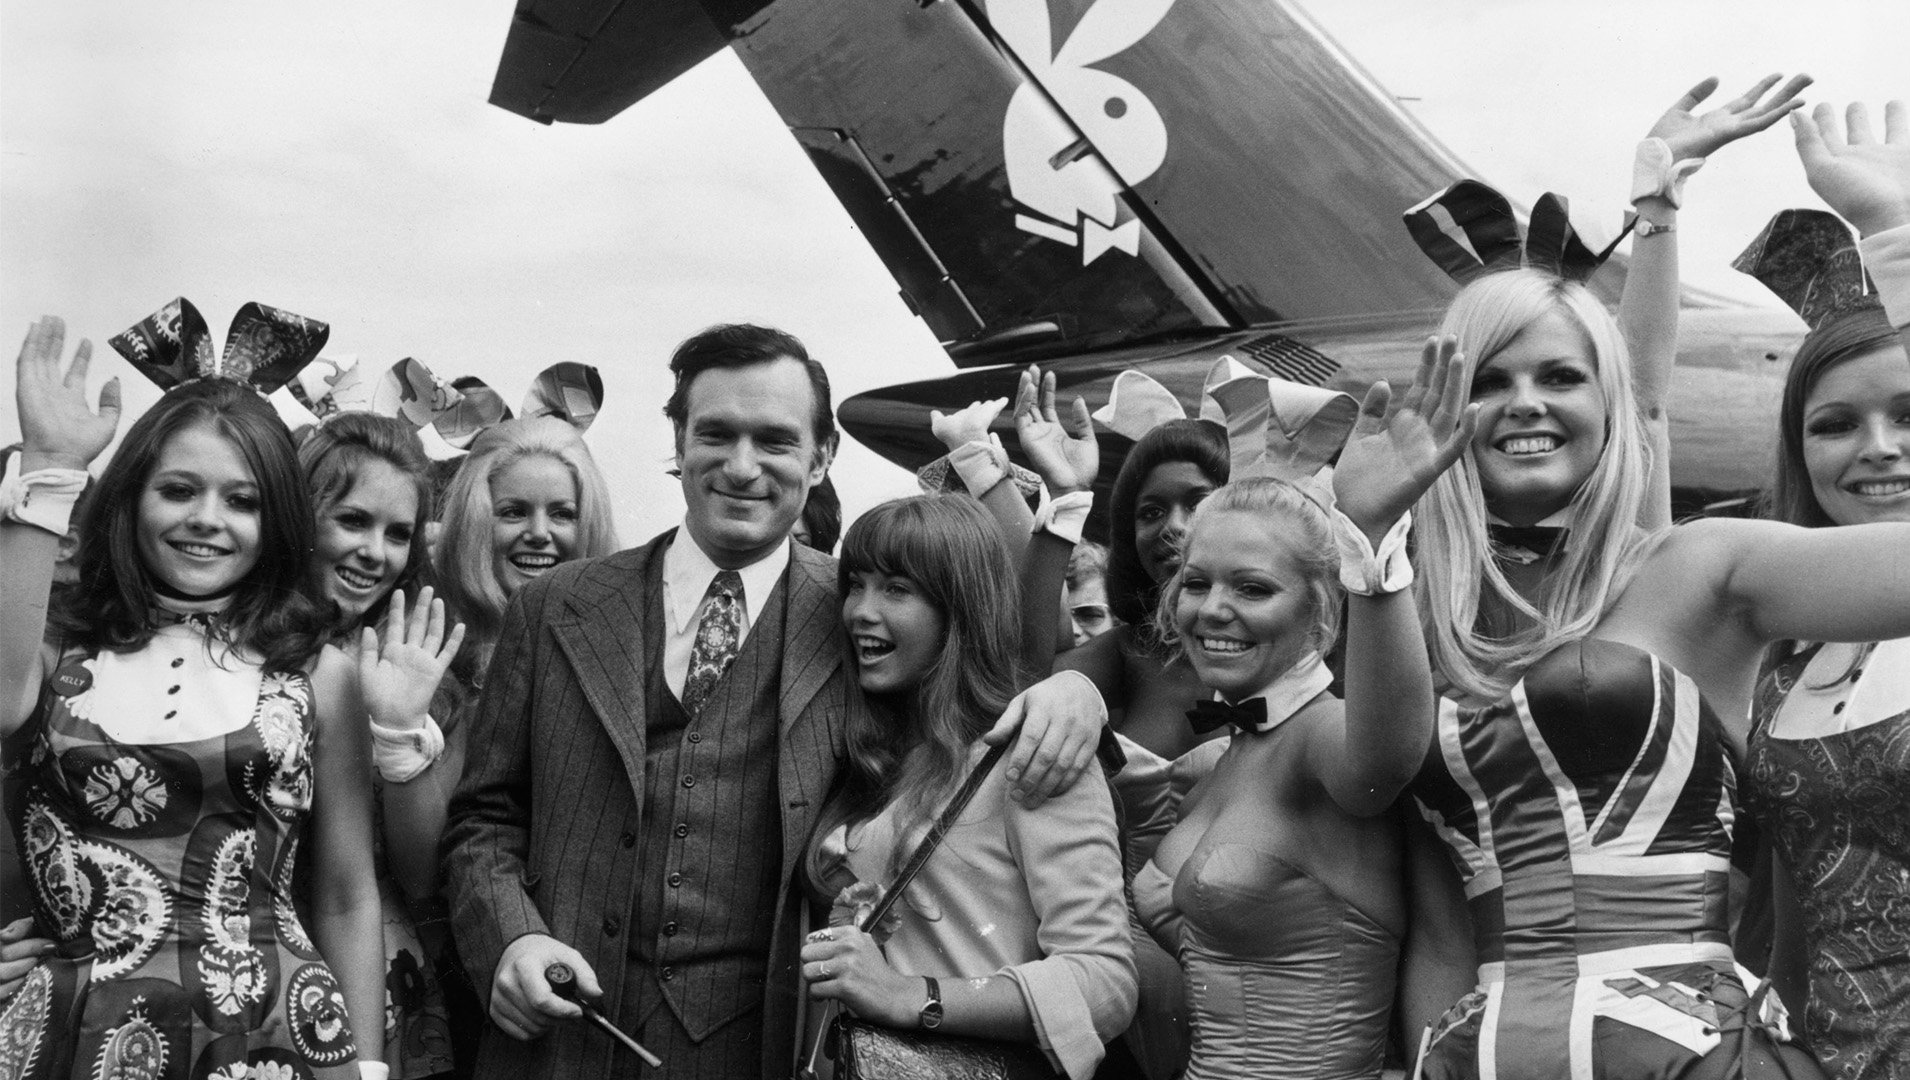 Hugh Hefner’s death: How the playboy giant’s passing spurred mixed reactions